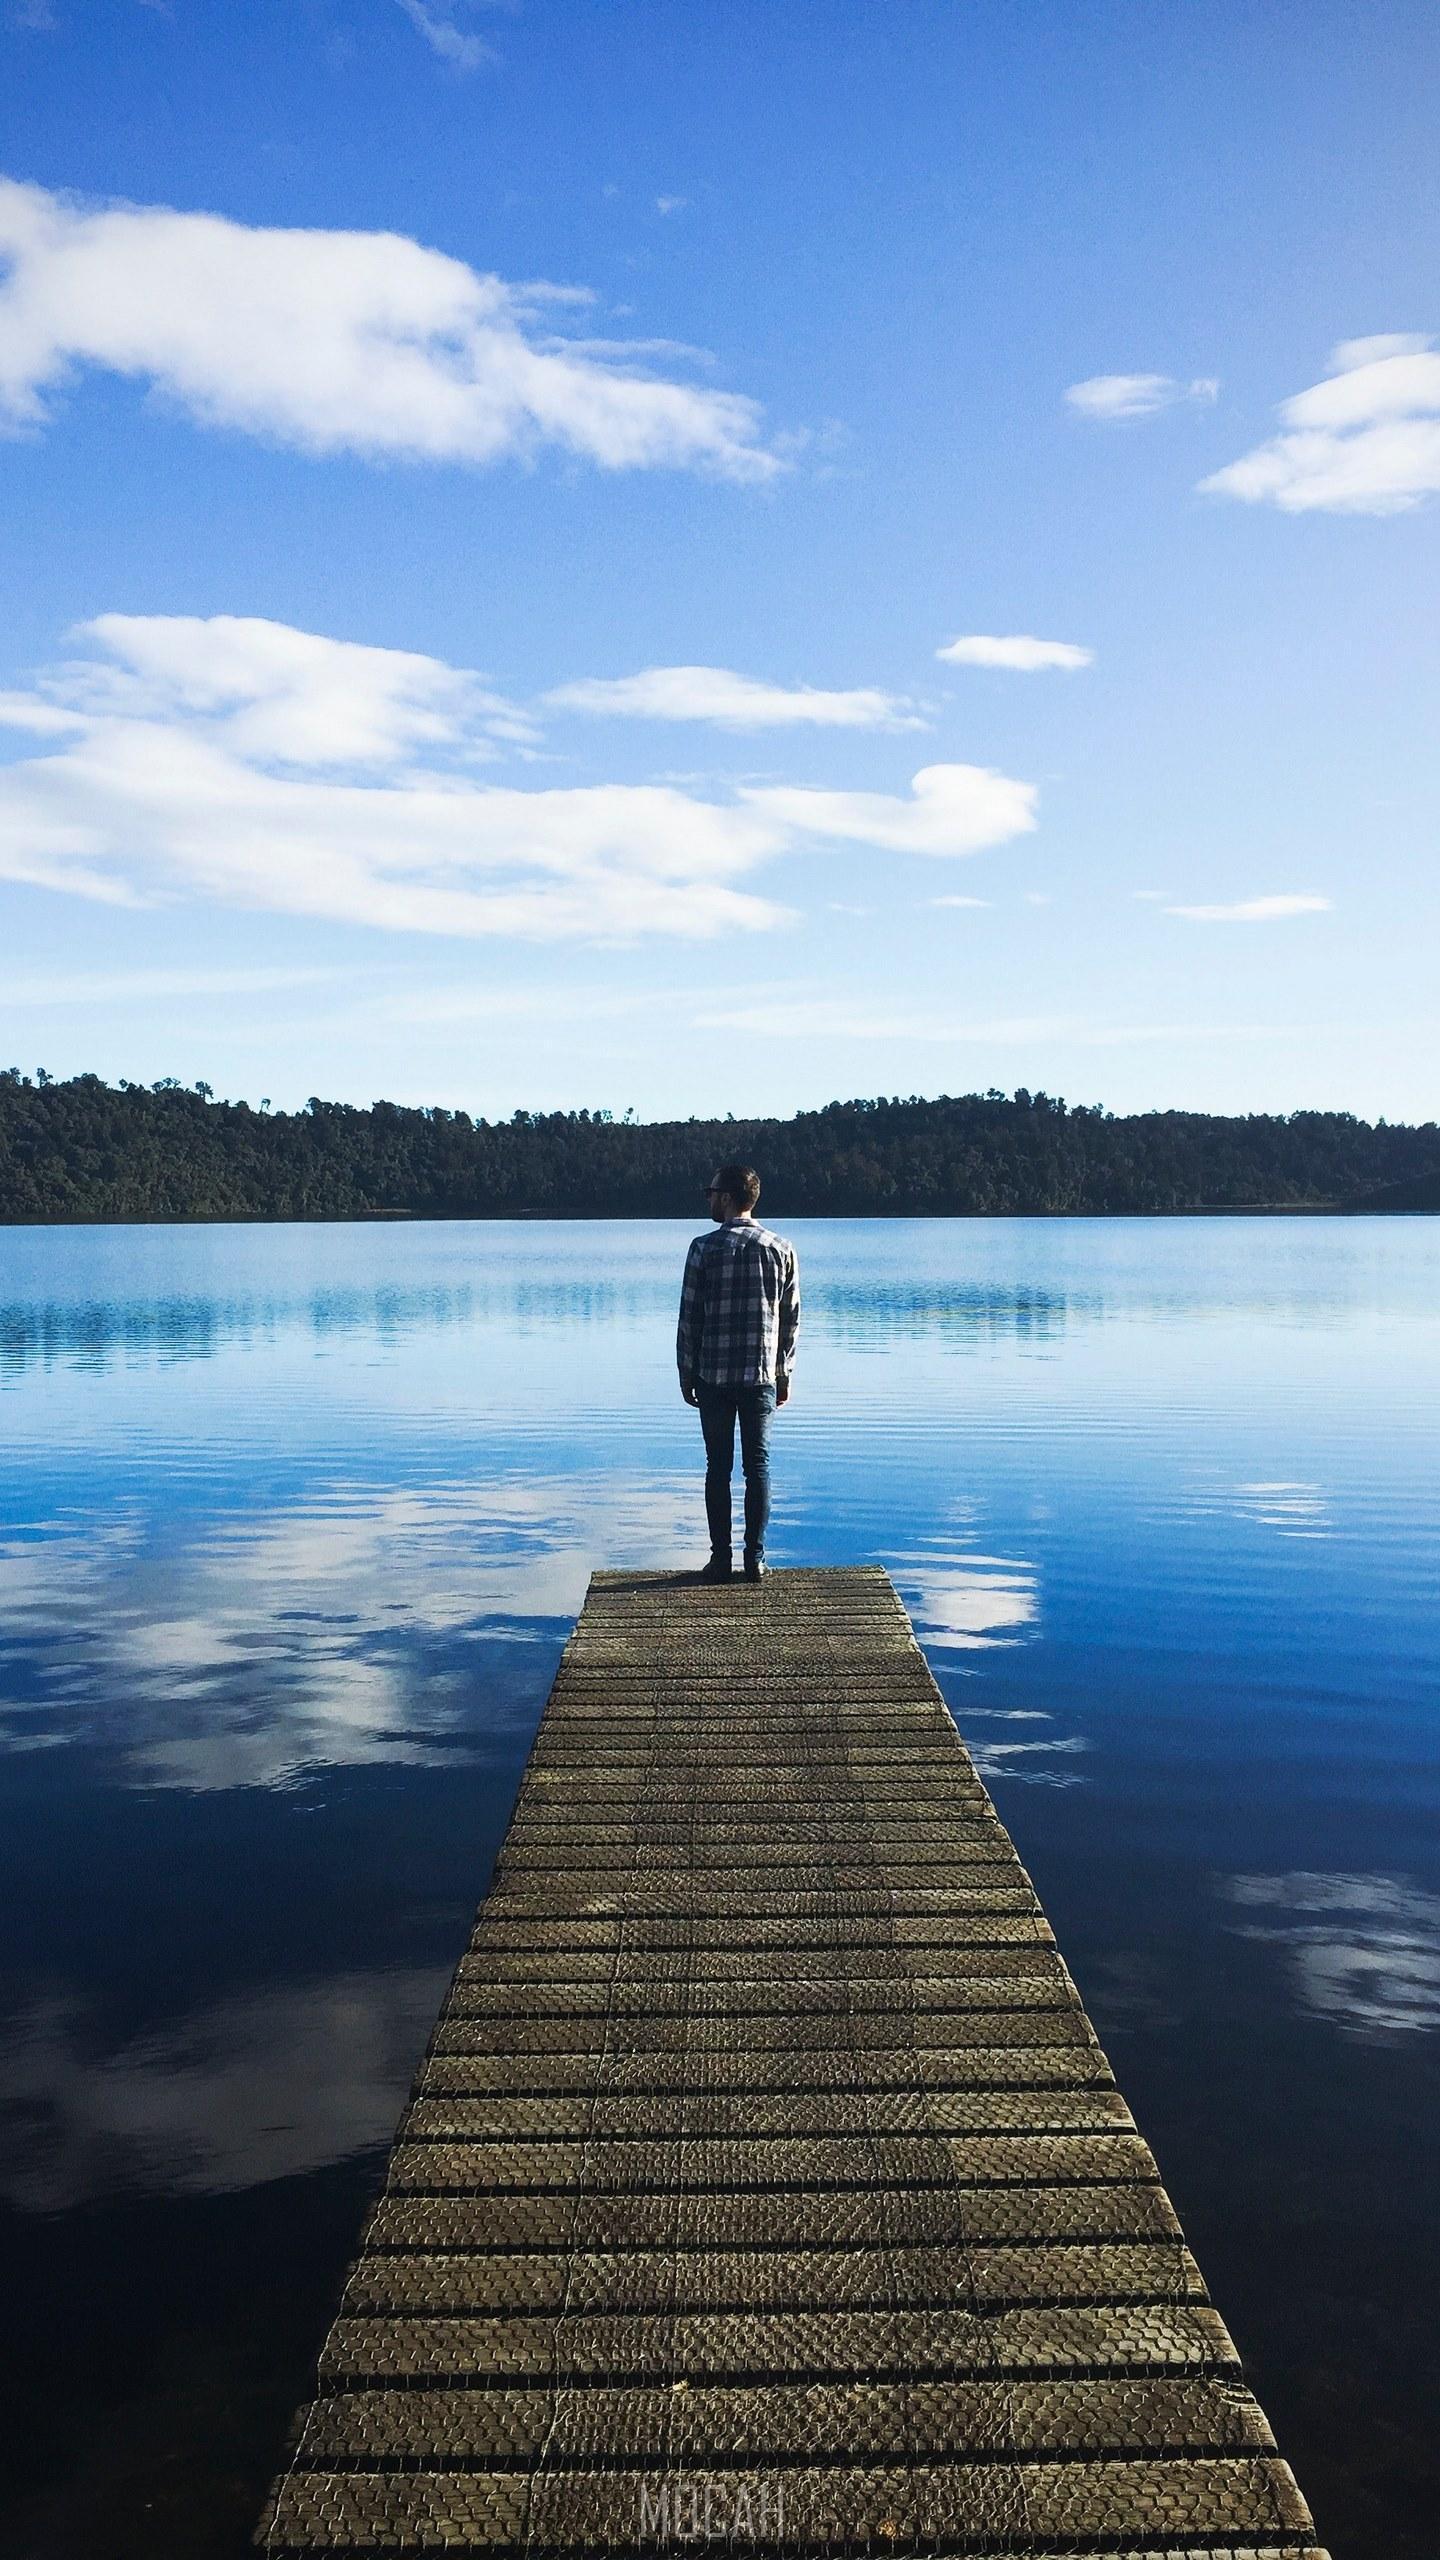 HD wallpaper, On The Piers Edge, A Man Wearing A Flannel Standing On The Edge Of A Dock On A Lake That Is Reflecting The Blue Sky And Clouds, Lg Q8 Screensaver, 1440X2560